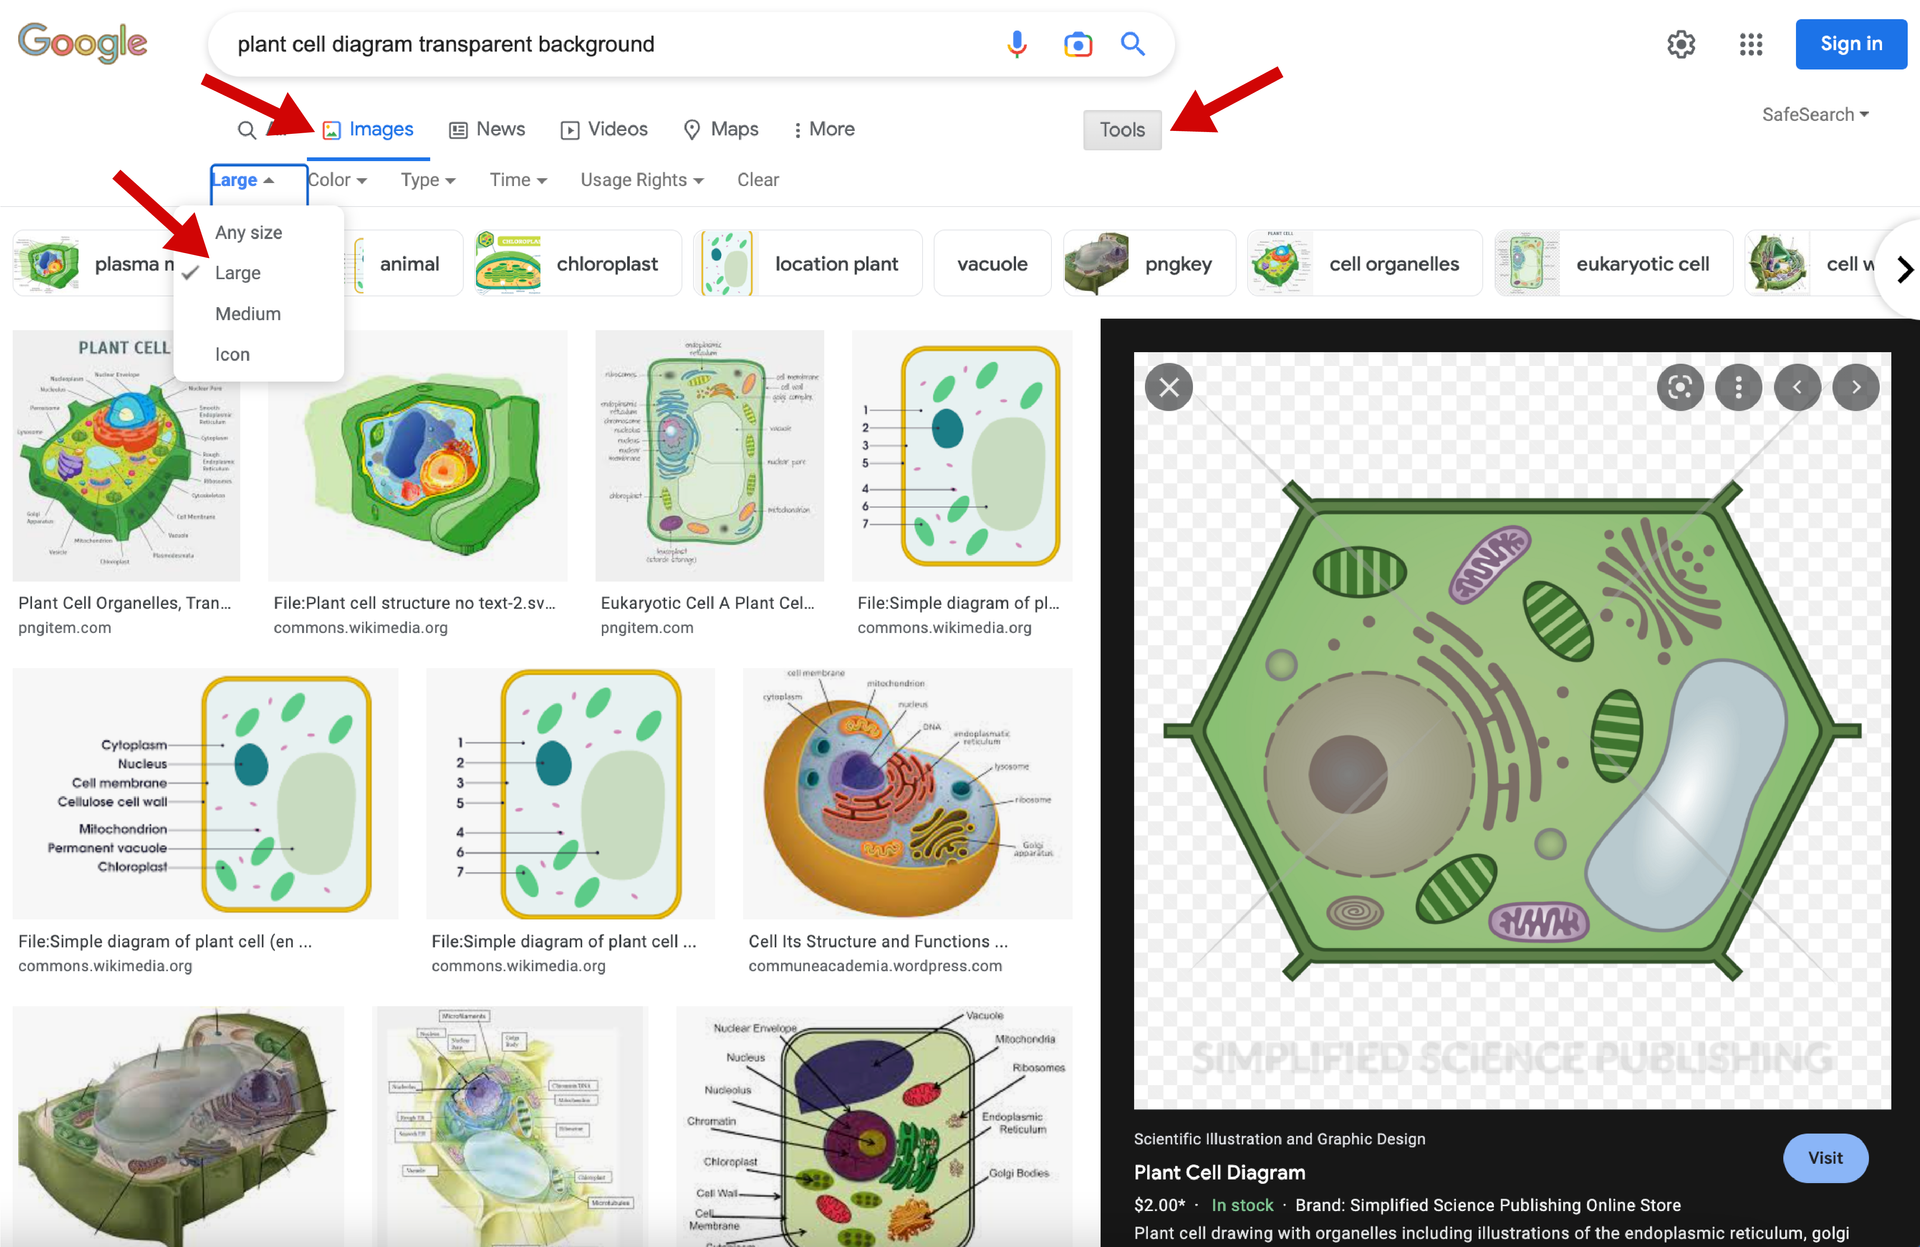 Screenshot Google example of transparent plant cell drawings